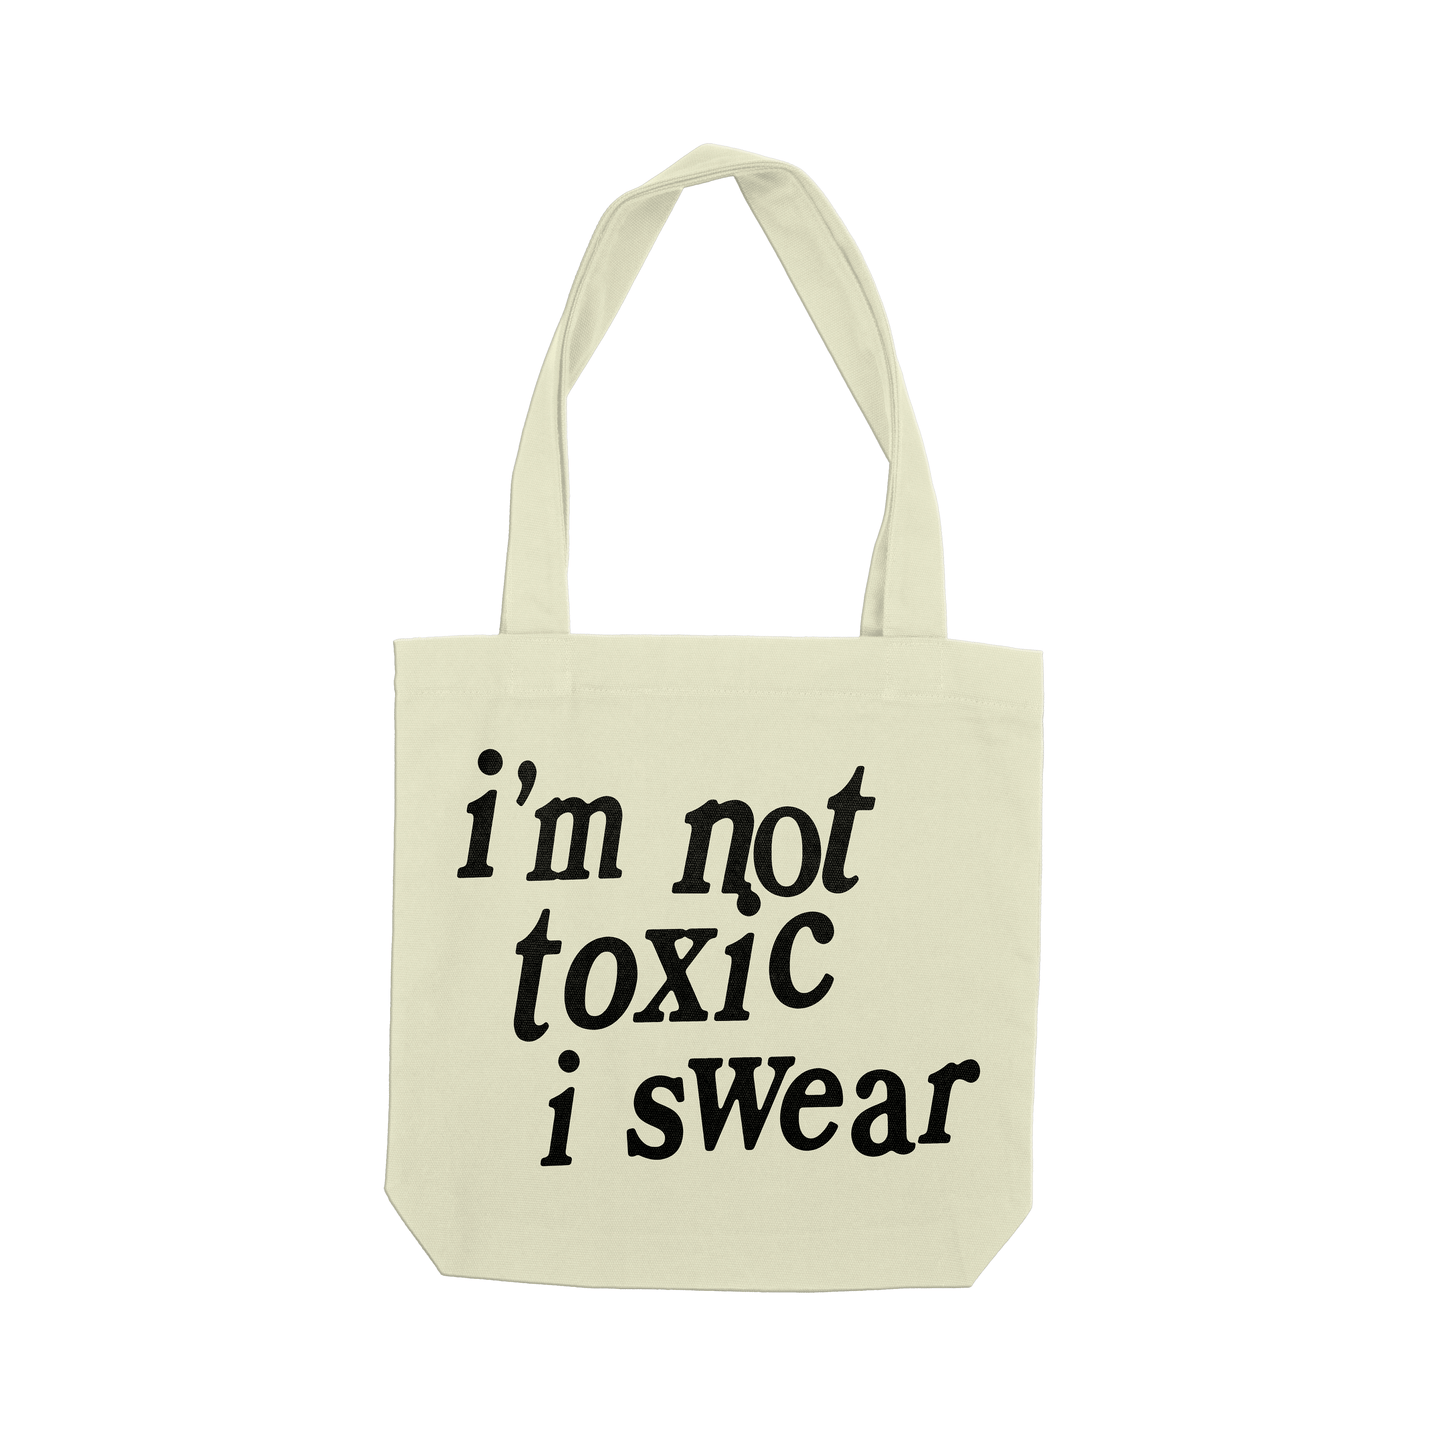 i'm not toxic i swear tour tote bag *LIMITED EDITION*